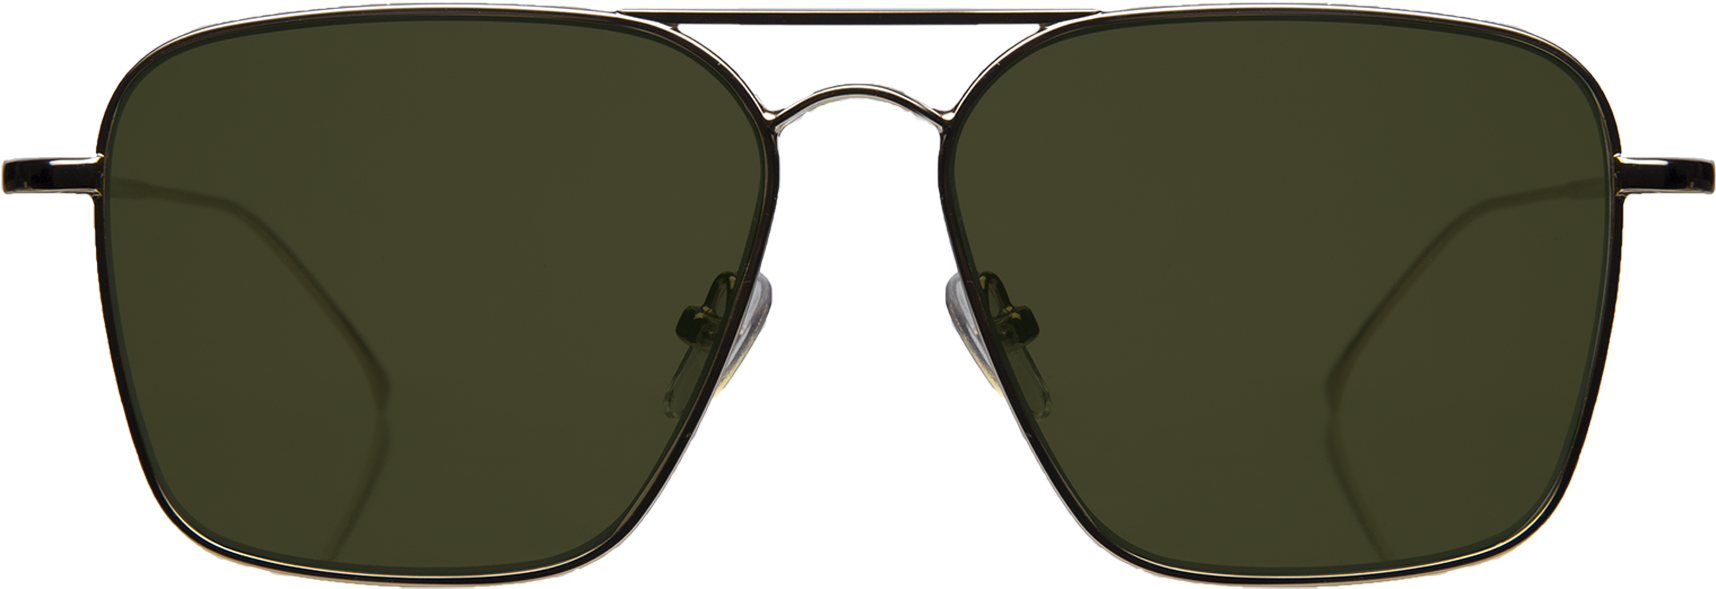 Classic Aviator Sunglasses Isolated PNG